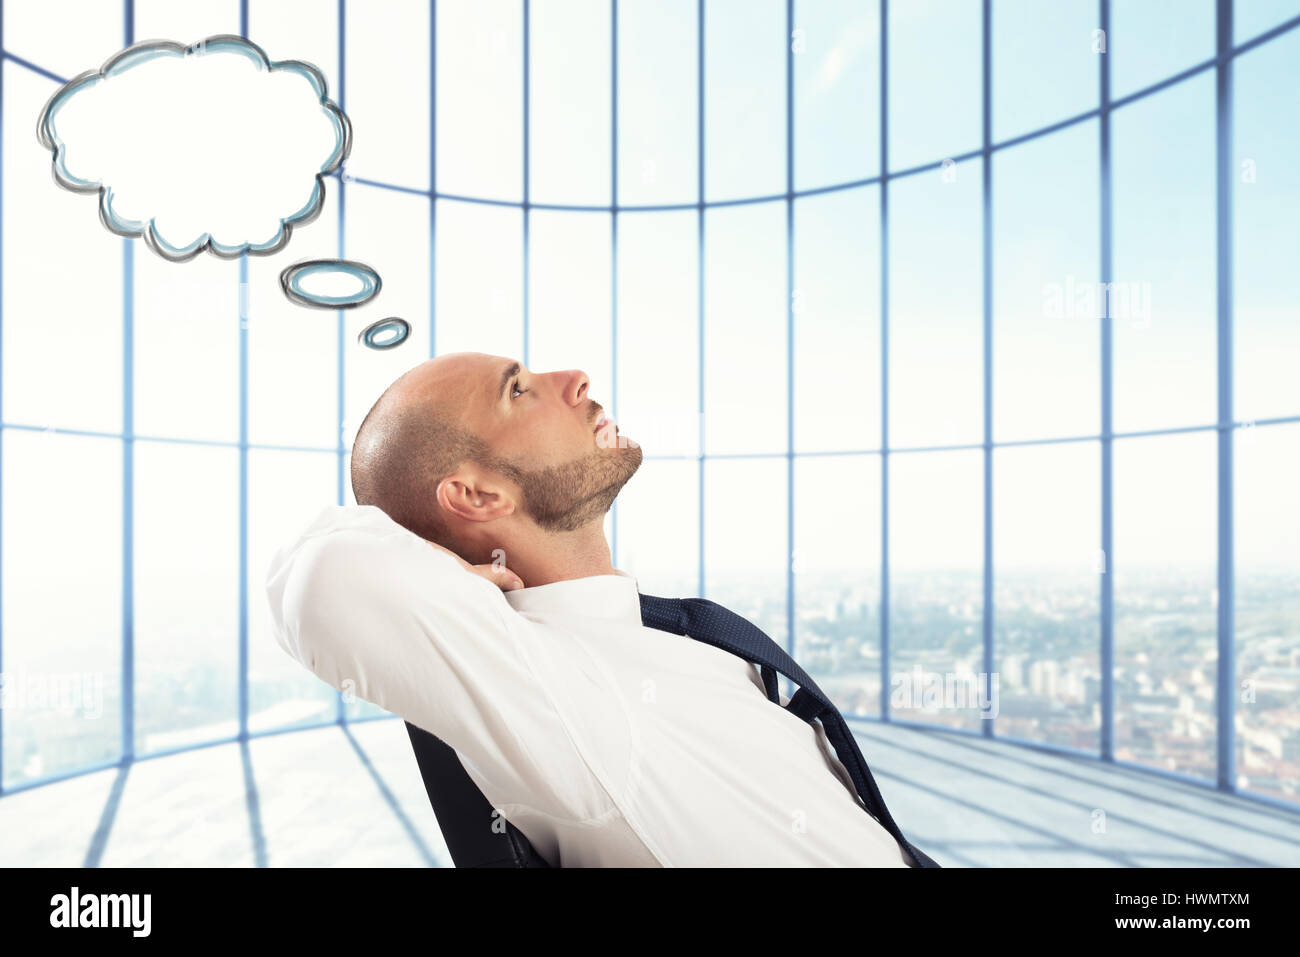 Successful Businessman relax and think Stock Photo